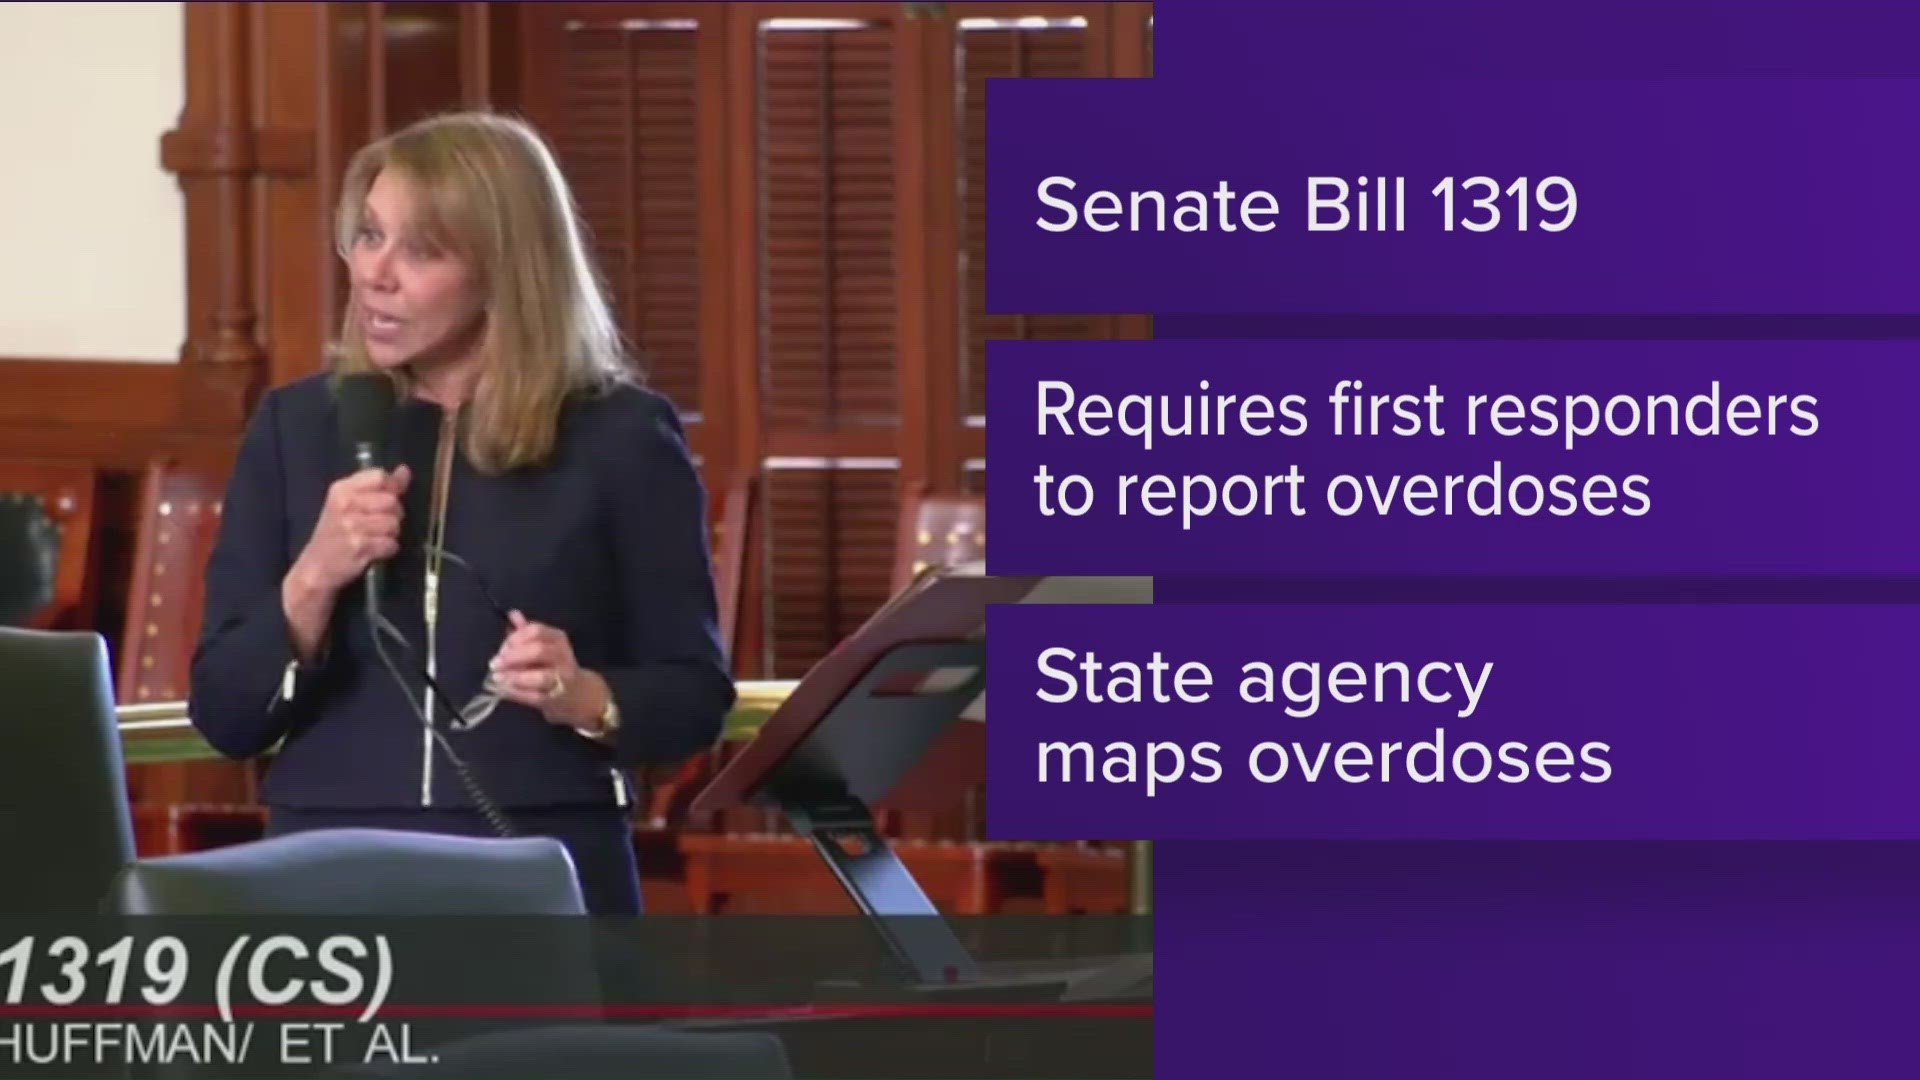 The Texas Senate on Wednesday unanimously approved two bills addressing the fentanyl crisis in Texas.